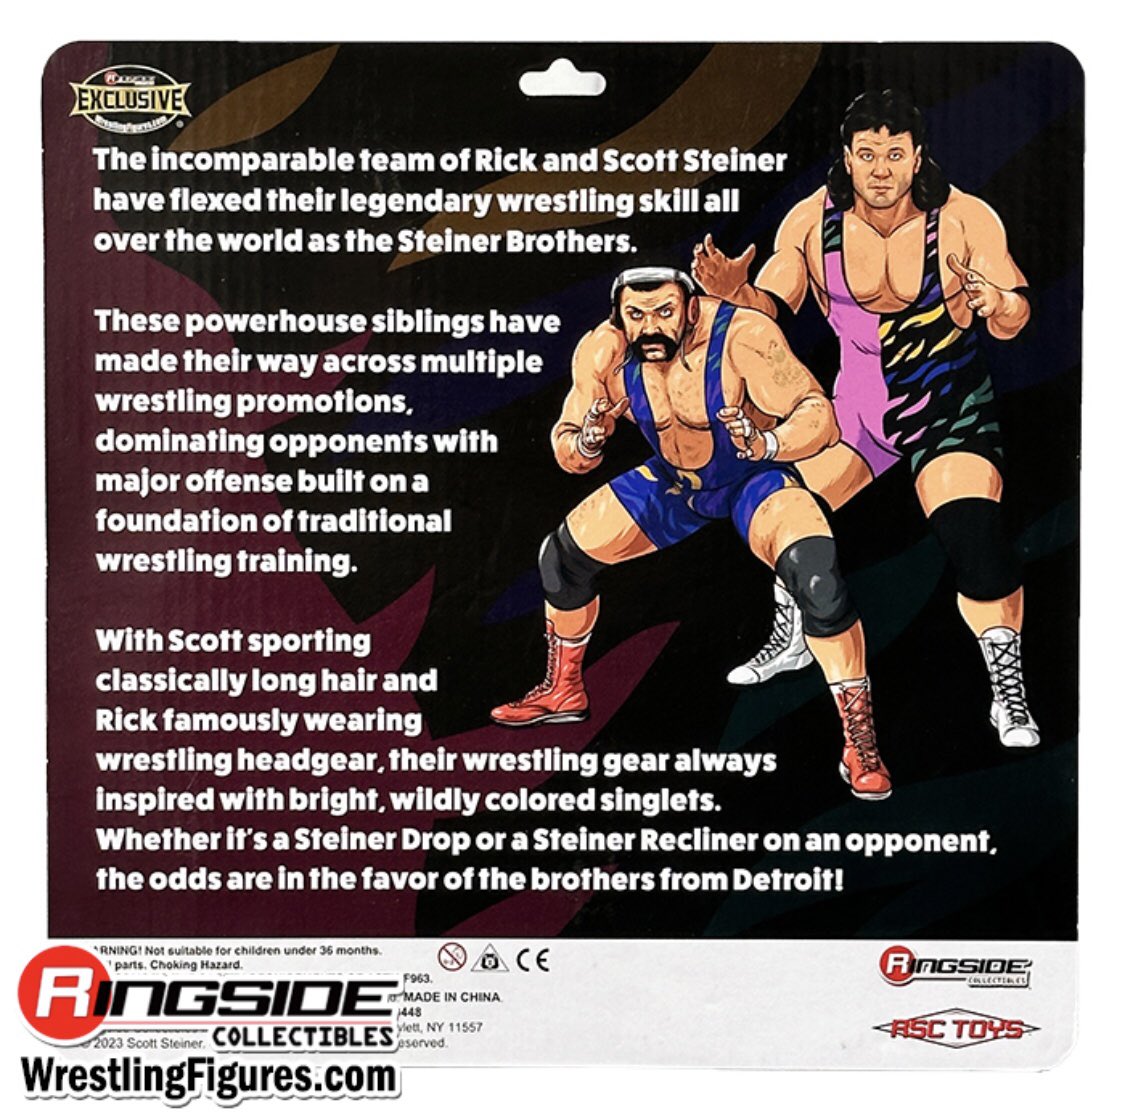 Steiner Brothers! Bell to Bell #bell2bell #steinerbrothers #actionfigures #ringsidecollectibles #ringsideexclusive #action #figures #figuremethis #fyp